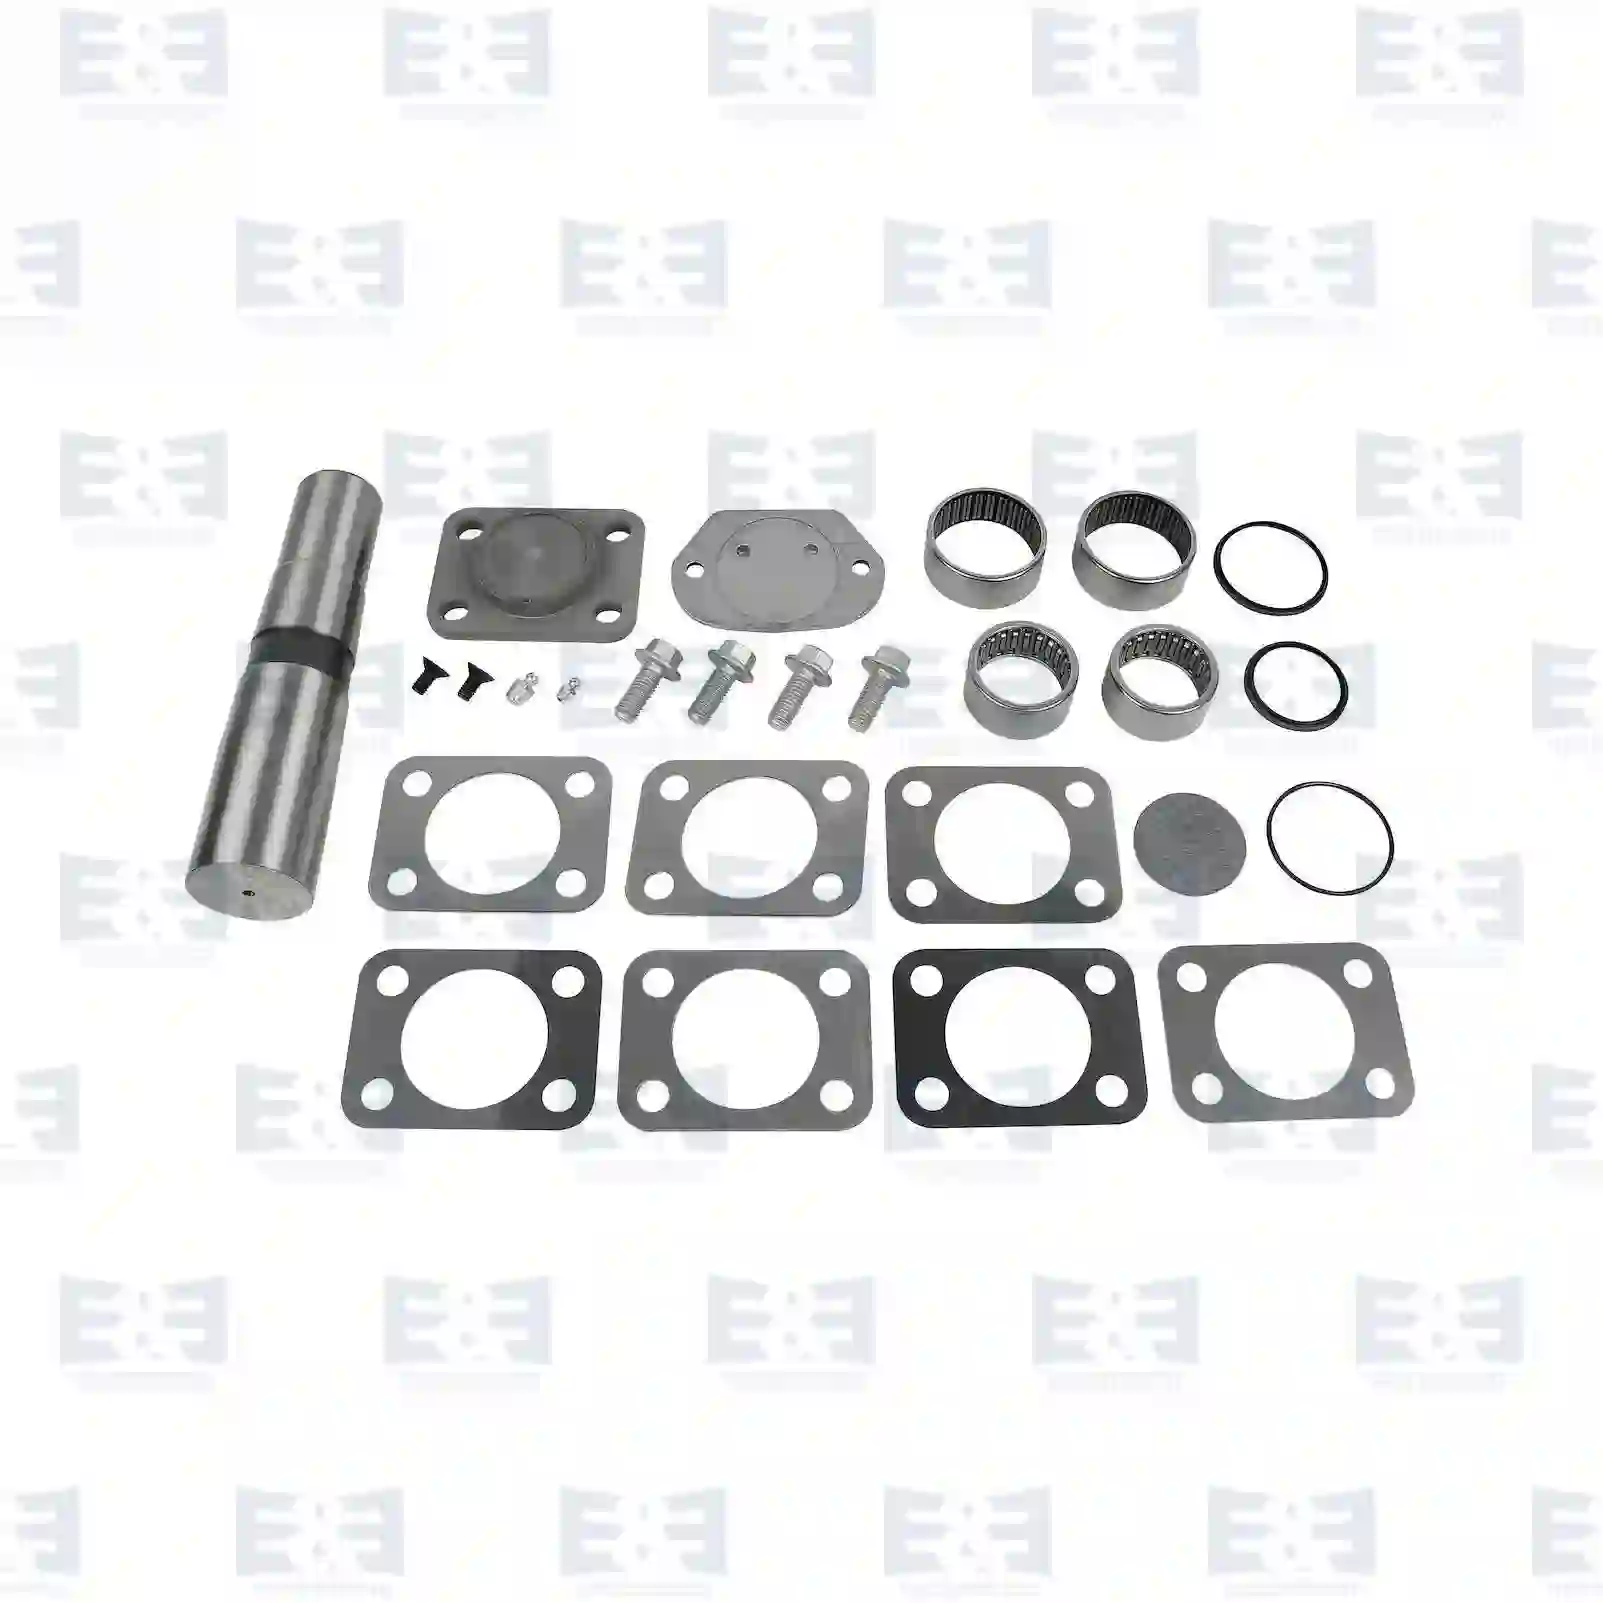  King pin kit, right || E&E Truck Spare Parts | Truck Spare Parts, Auotomotive Spare Parts